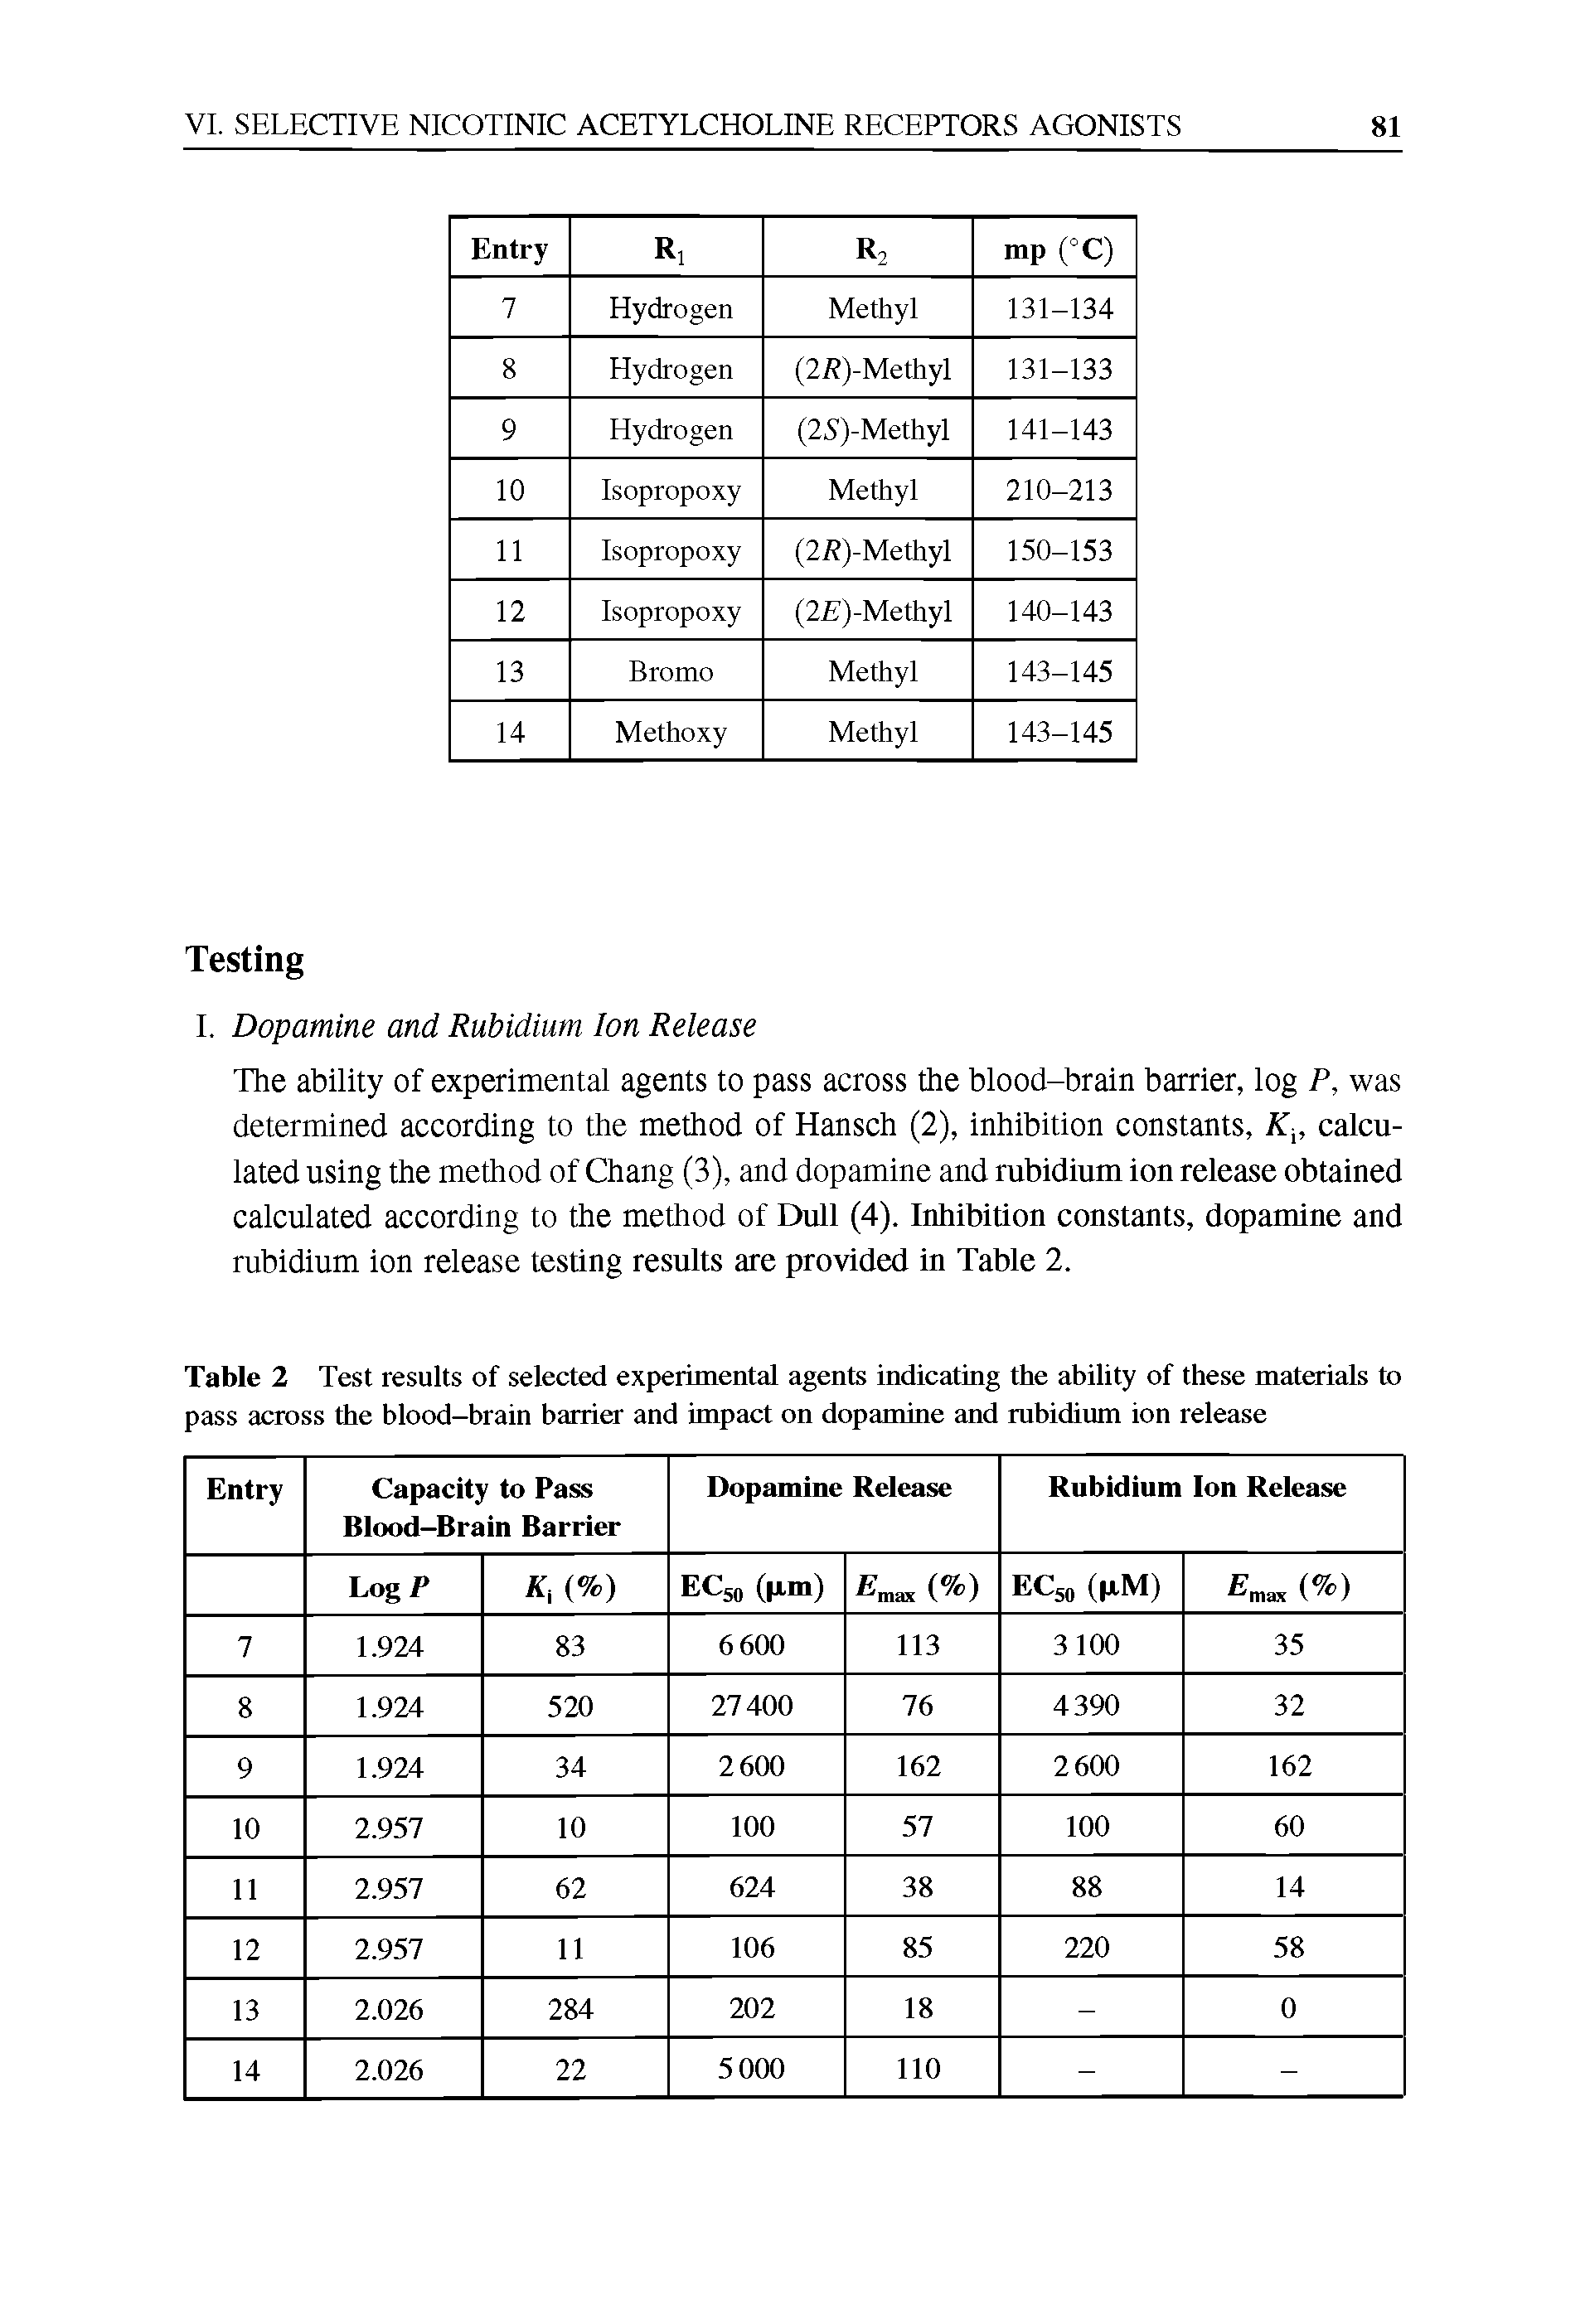 Table 2 Test results of selected experimental agents indicating the ability of these materials to pass across the blood-brain barrier and impact on dopamine and rubidium ion release...